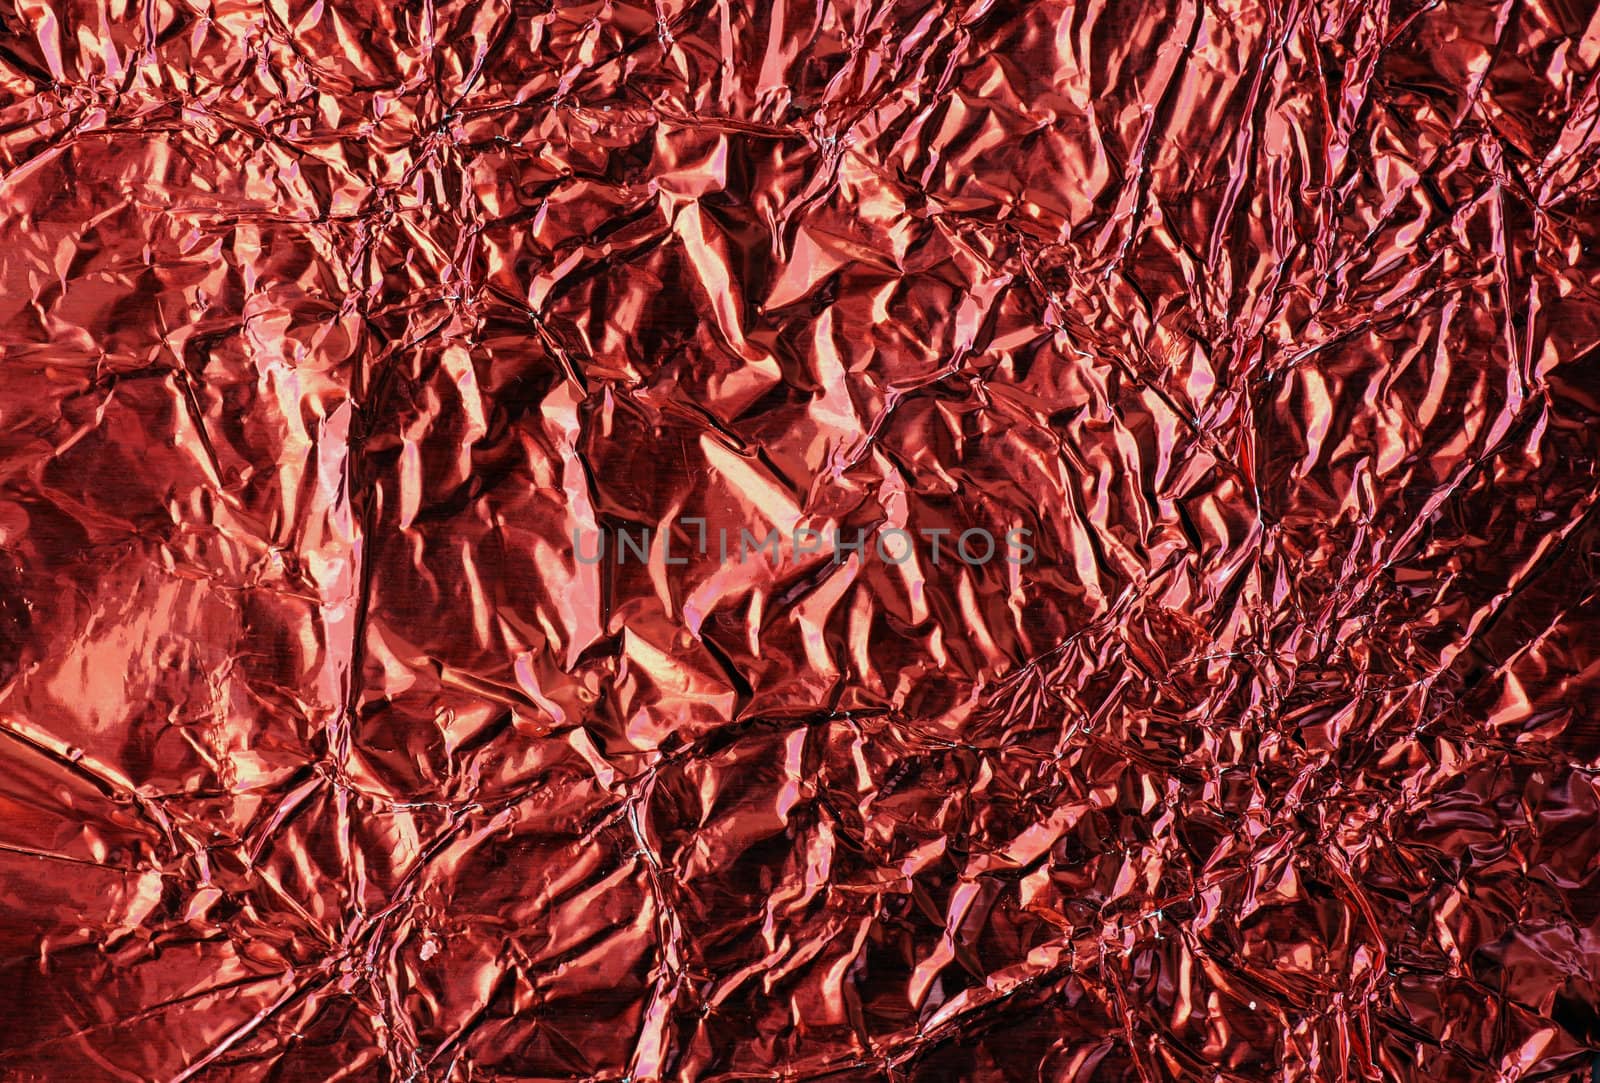 Wrinkled red foil by Mirage3